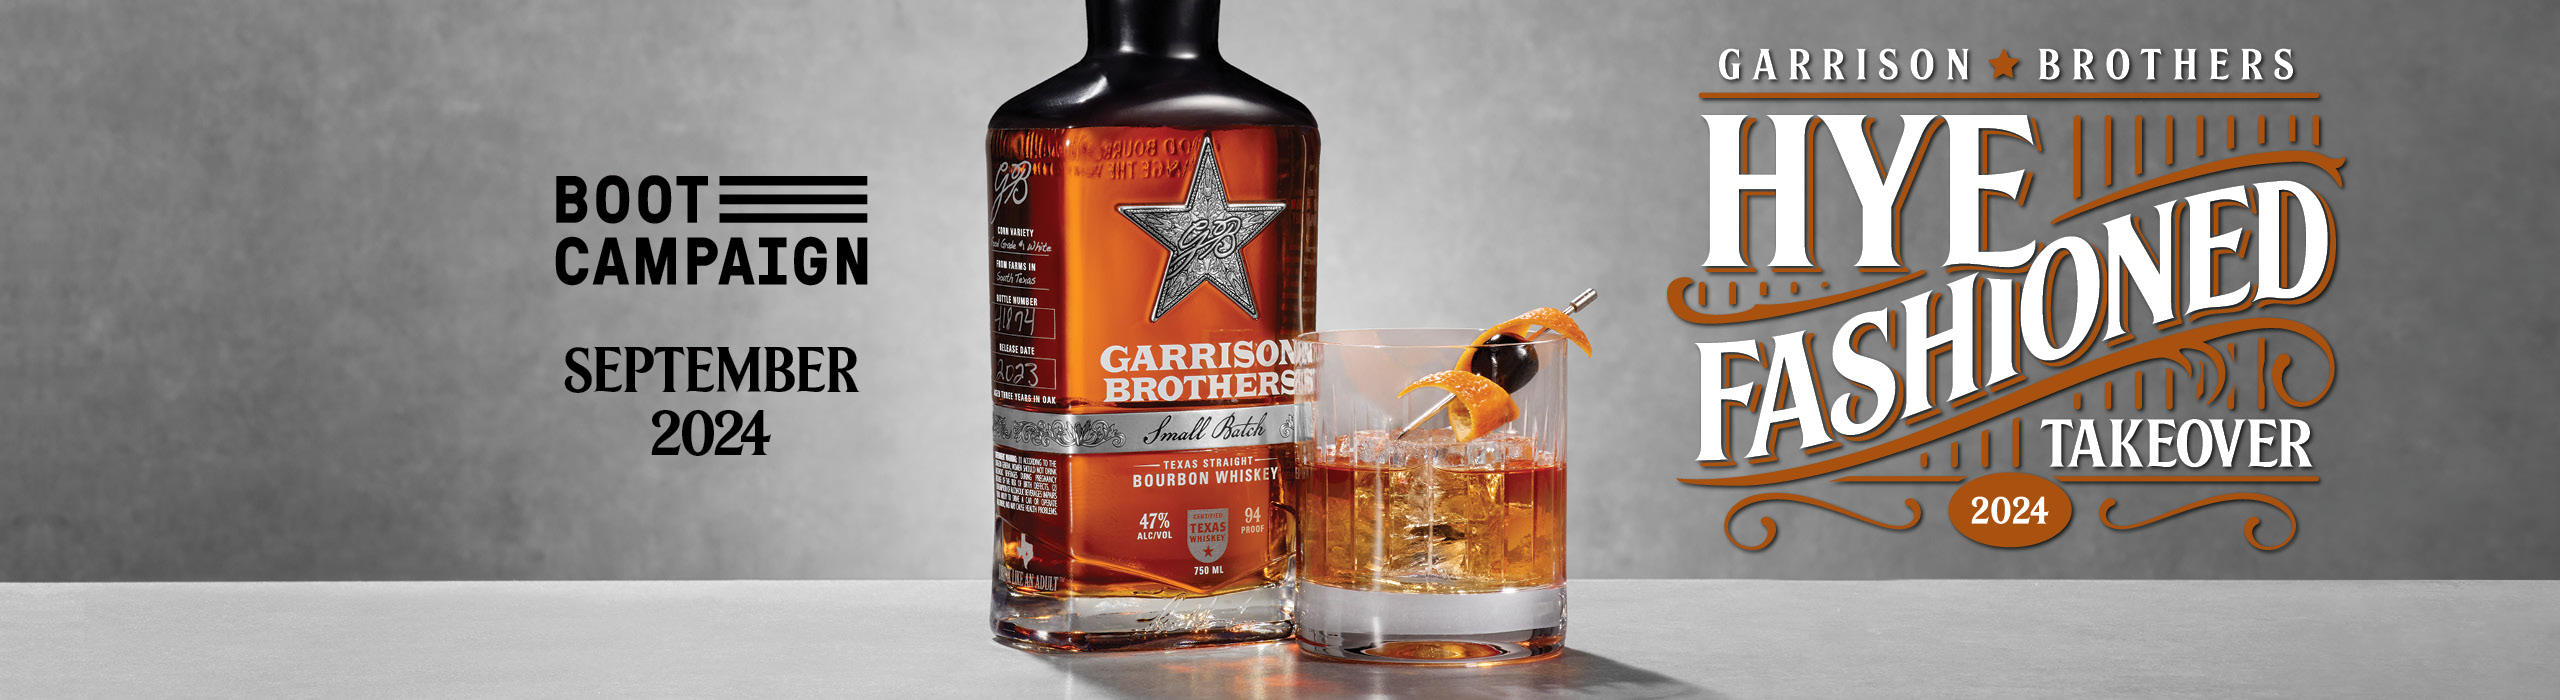 2024 Garrison Brothers Hye Fashioned Takeover